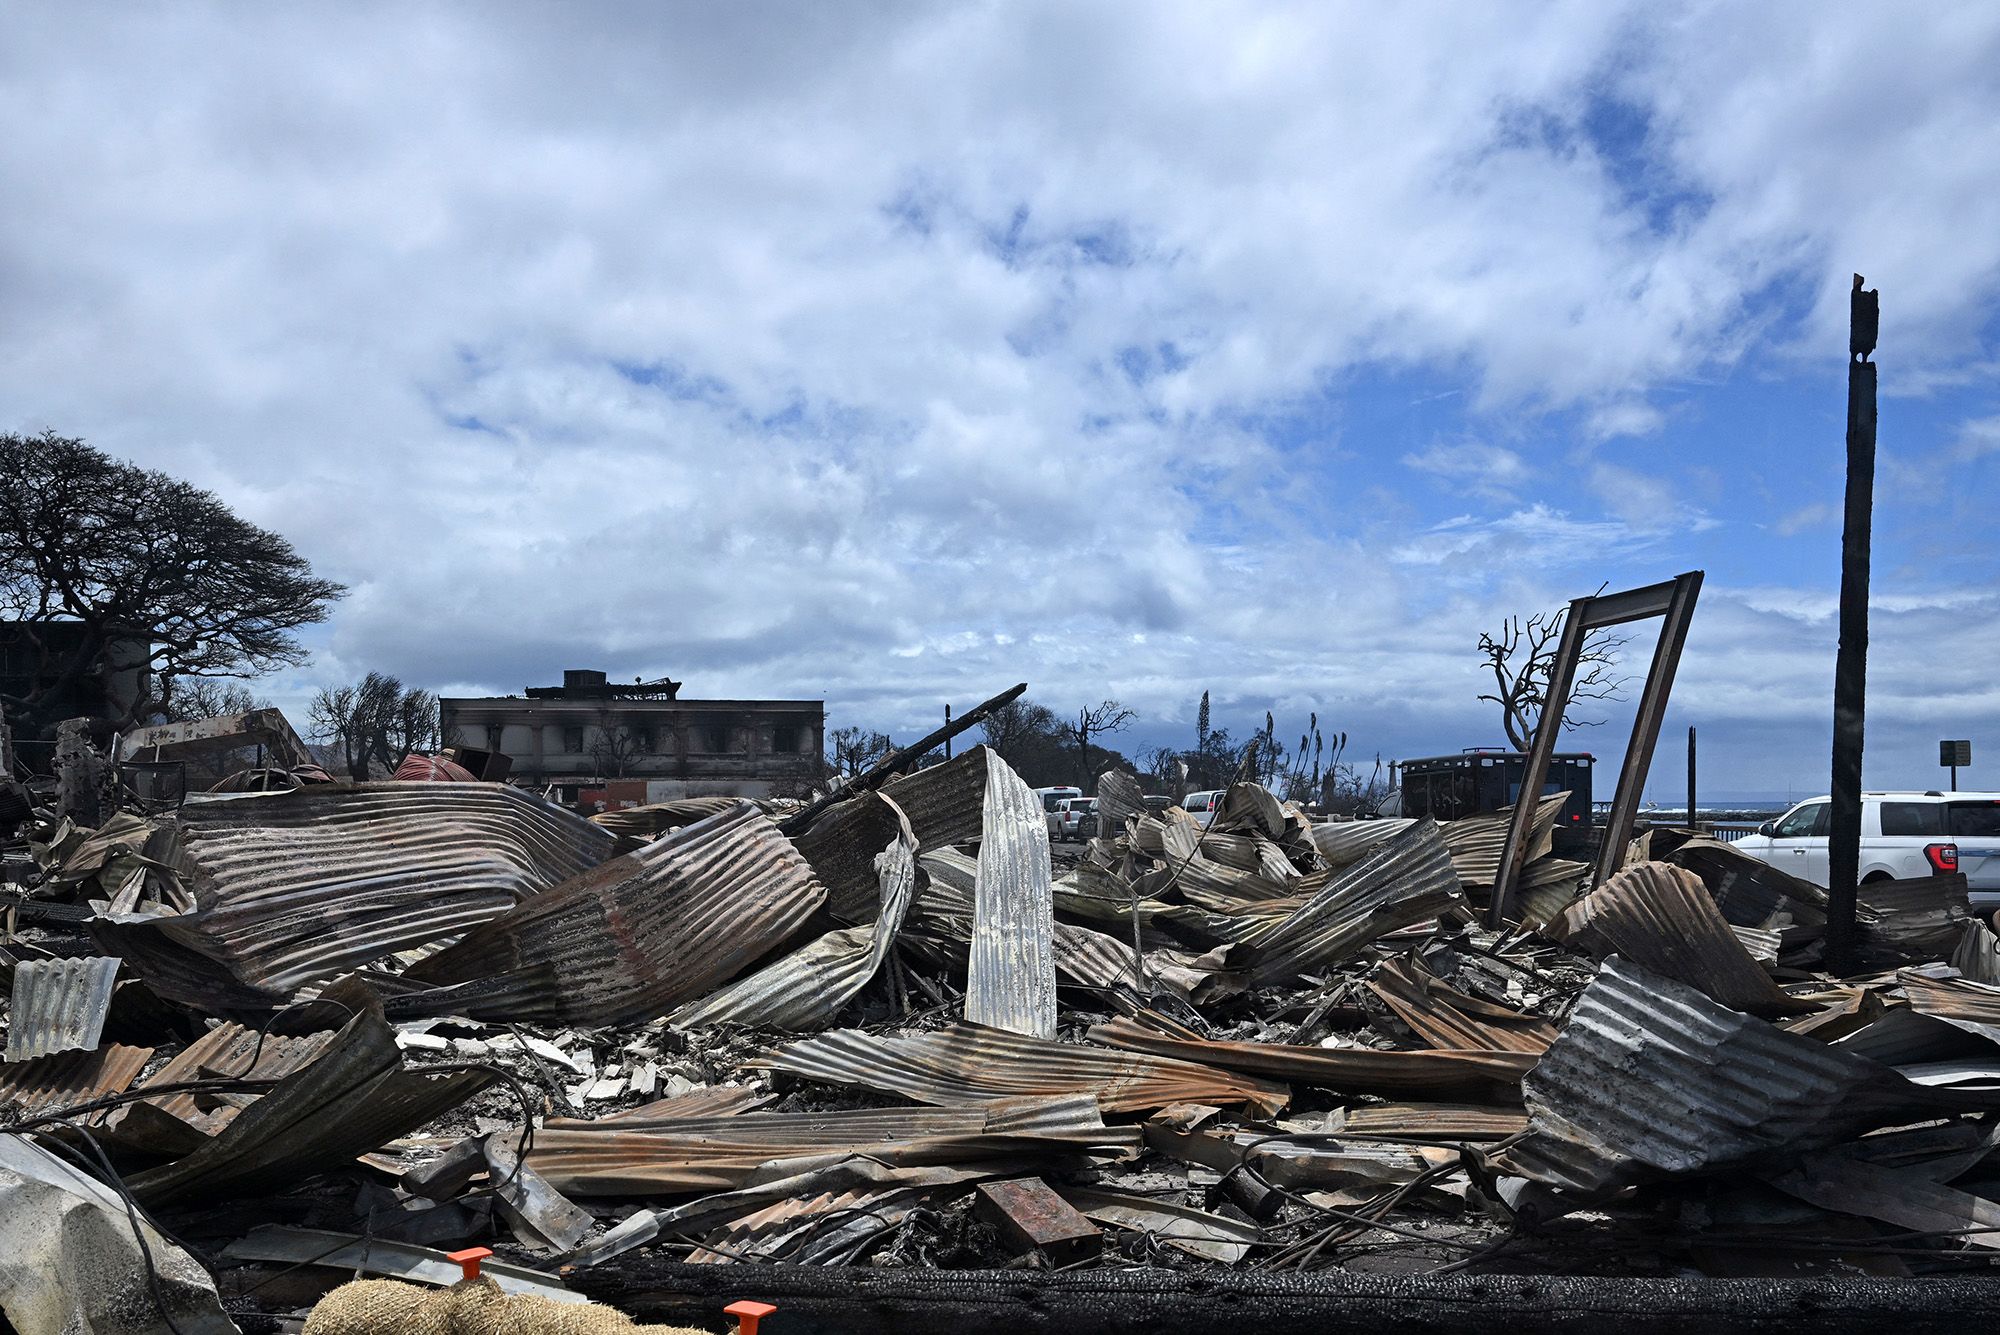 Many Maui restaurants were destroyed in the fires. For those that survived,  their future remains uncertain | CNN Business